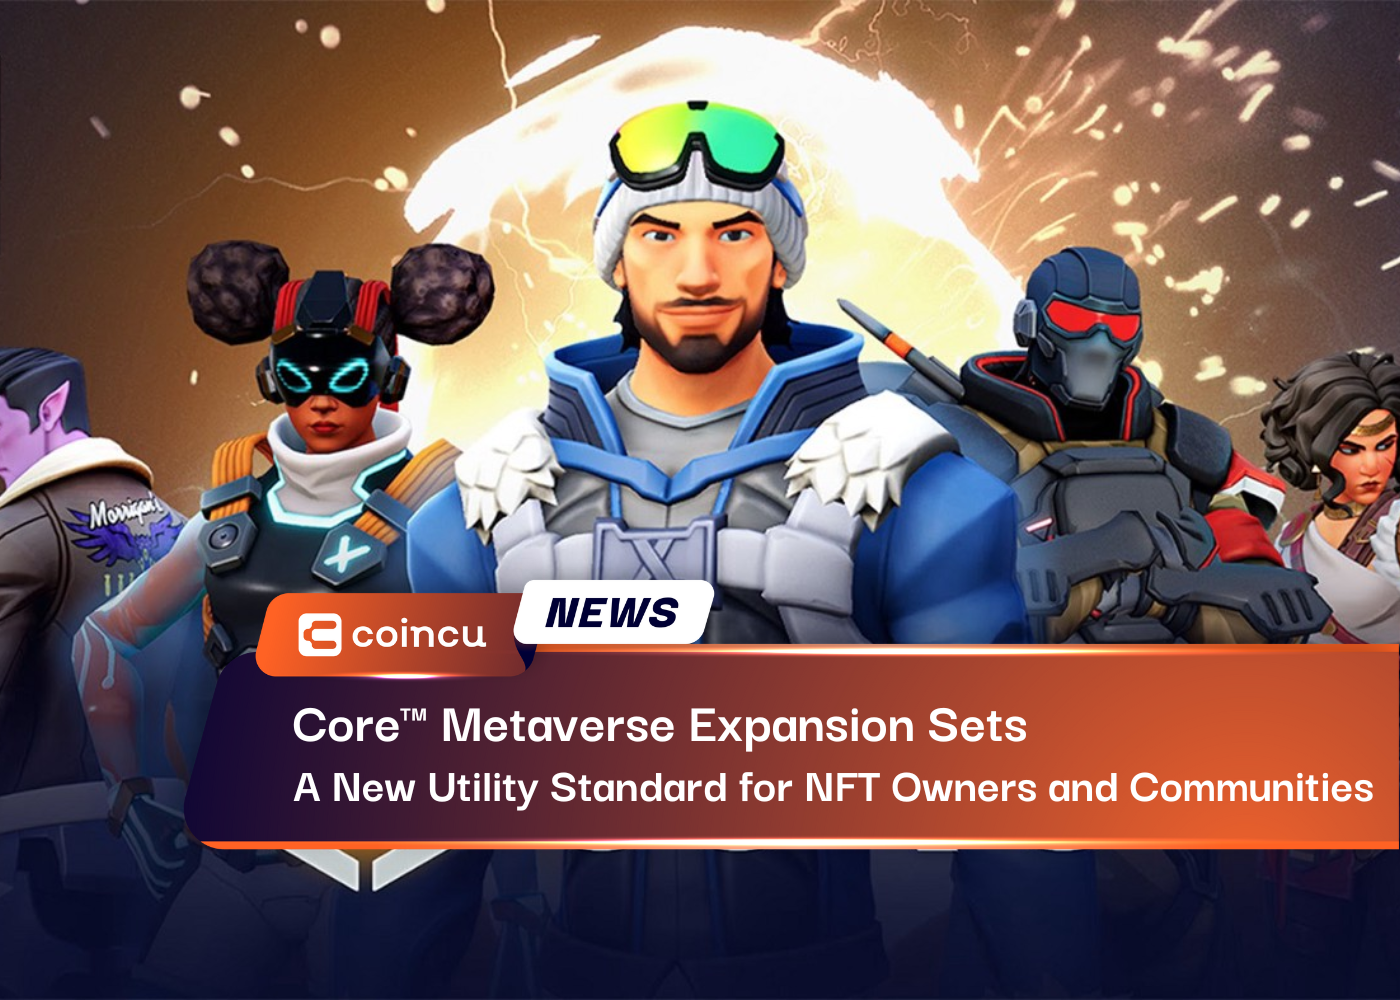 Core™ Metaverse Expansion Sets A New Utility Standard for NFT Owners and Communities